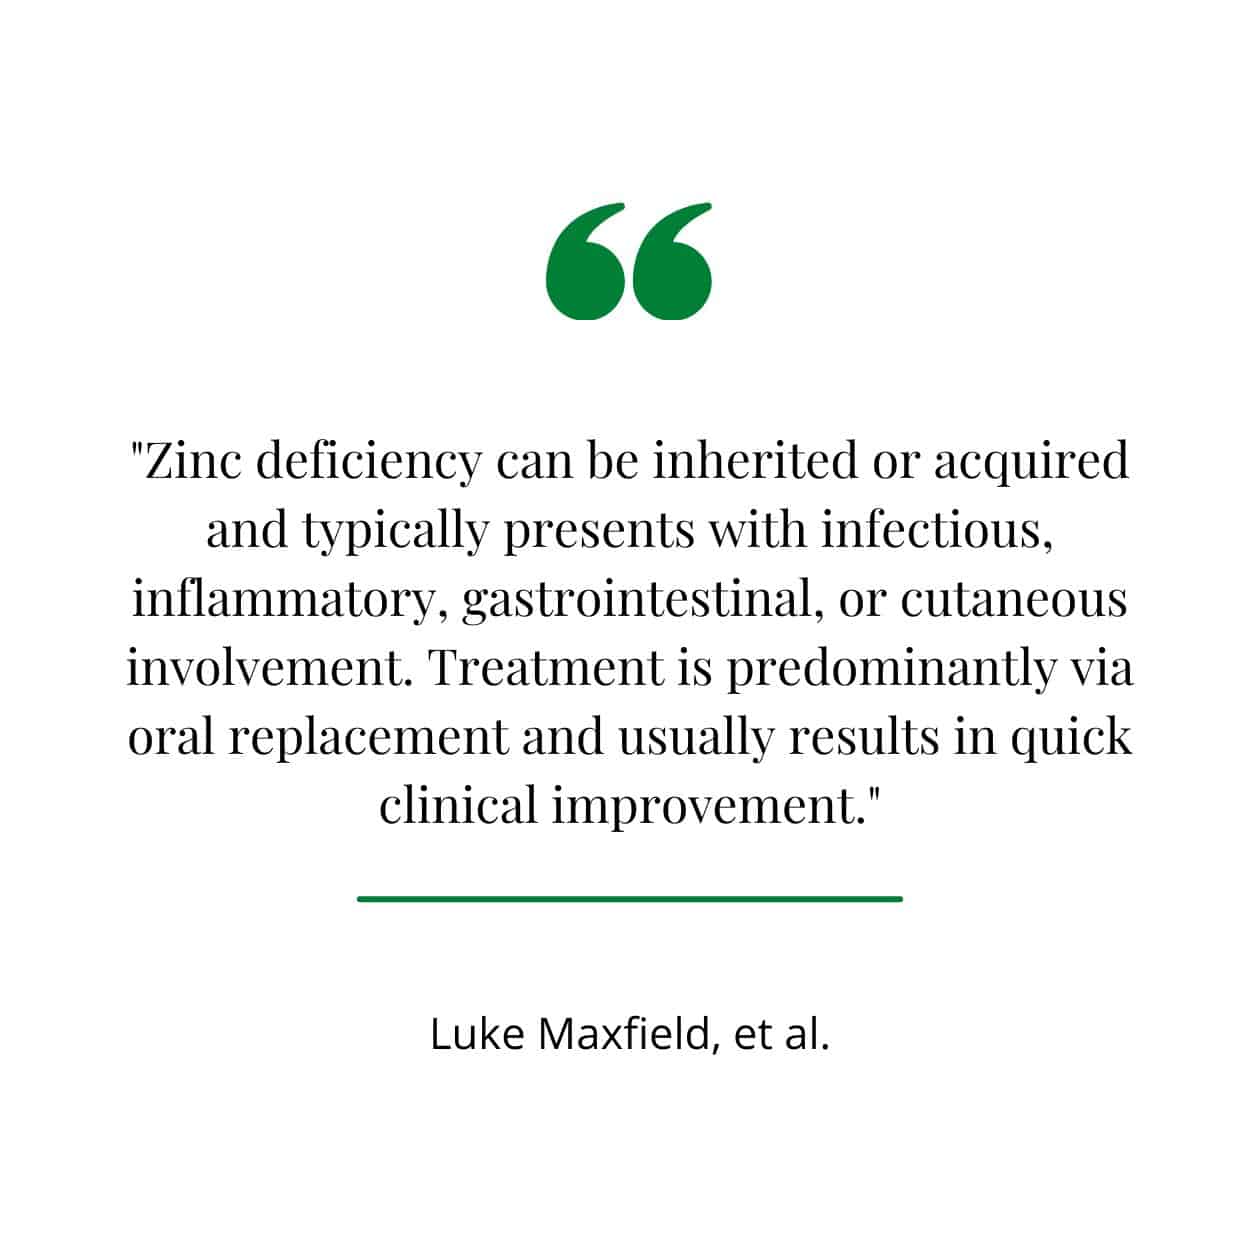 Zinc deficiency treatment quote from the National Library of Internal Medicine.